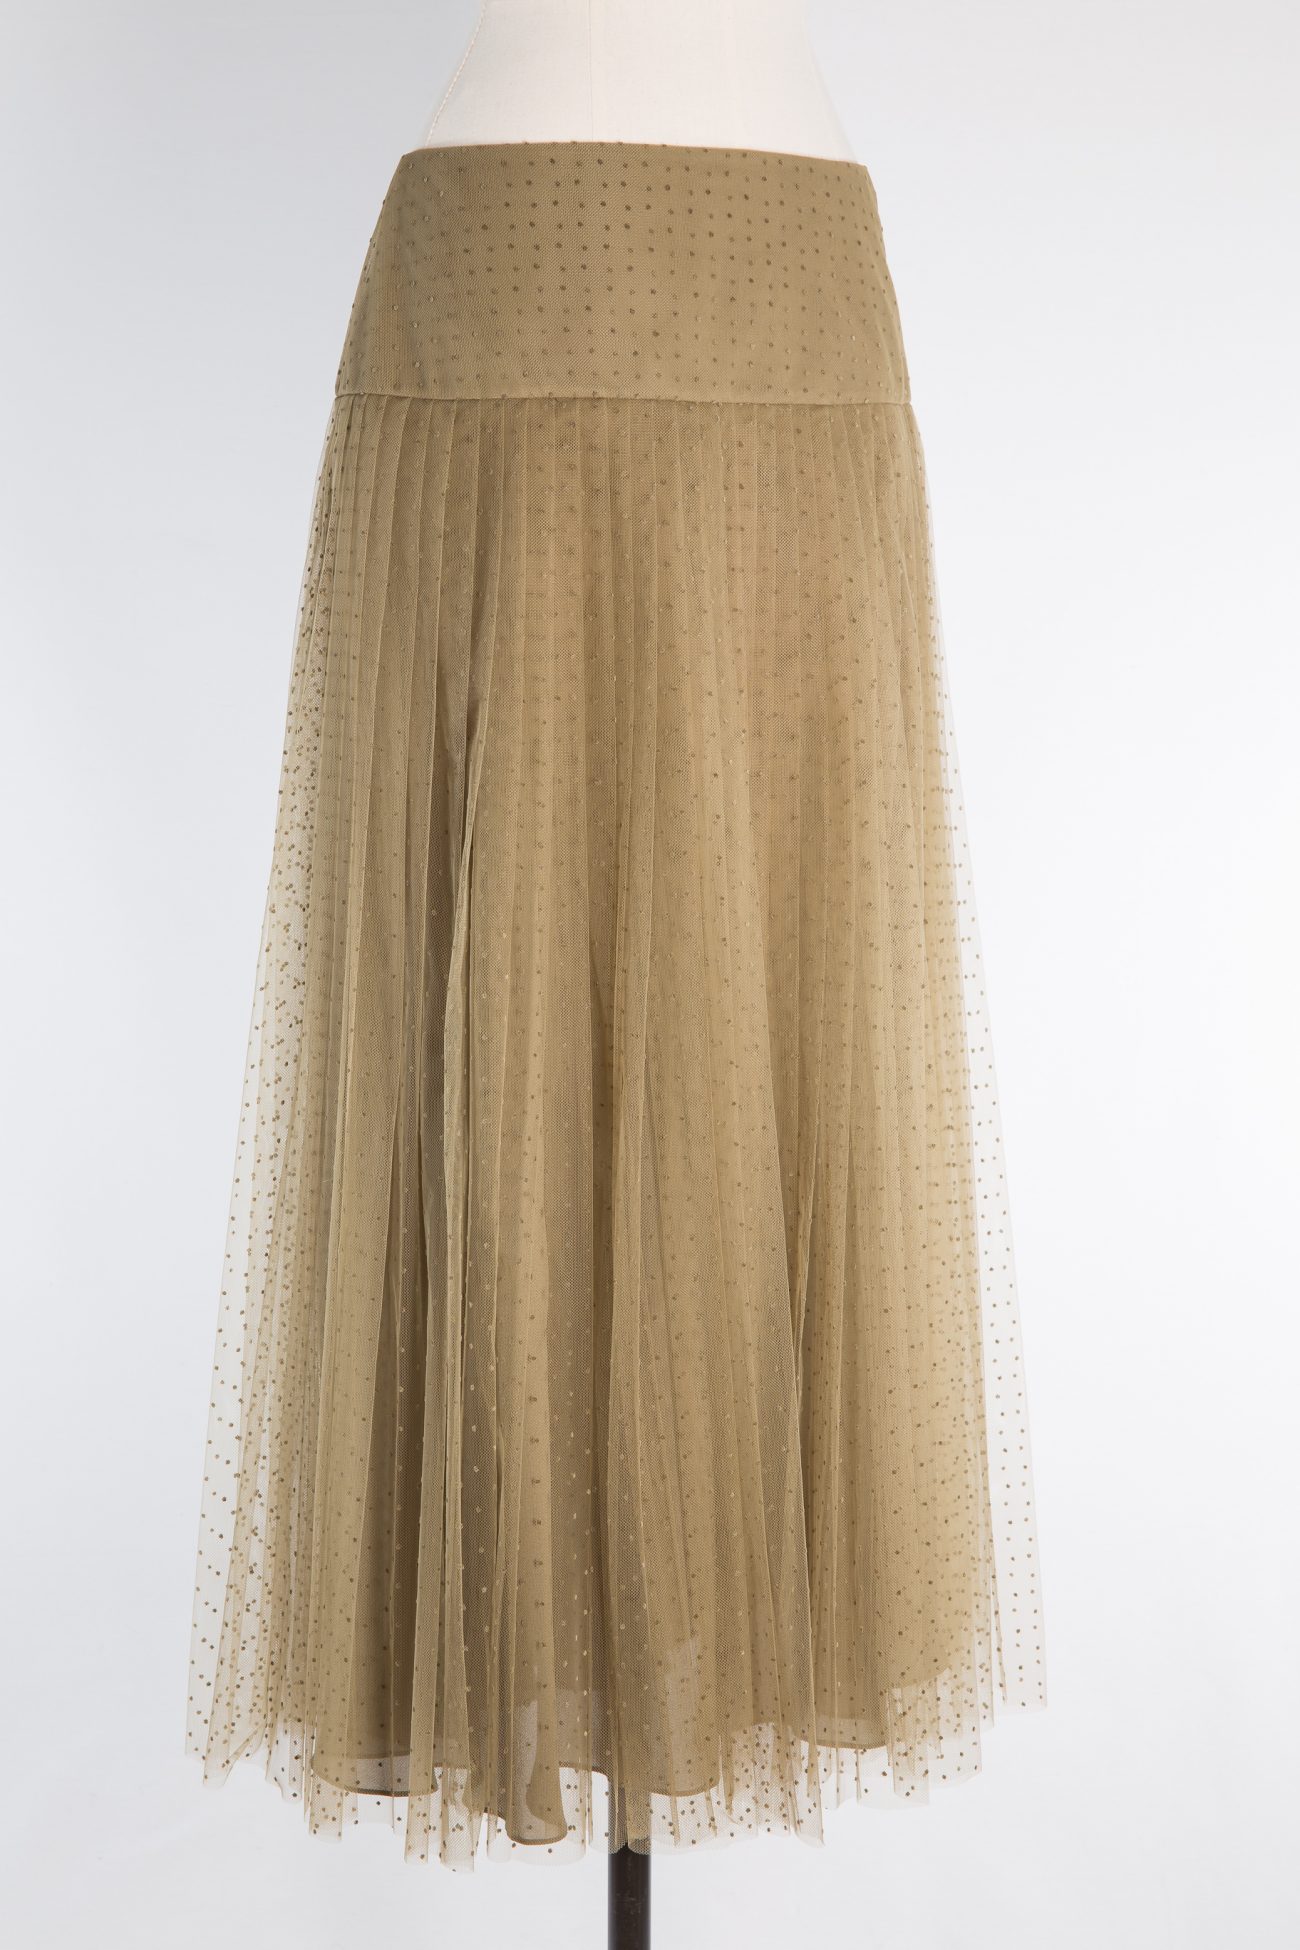 dior tulle skirt price